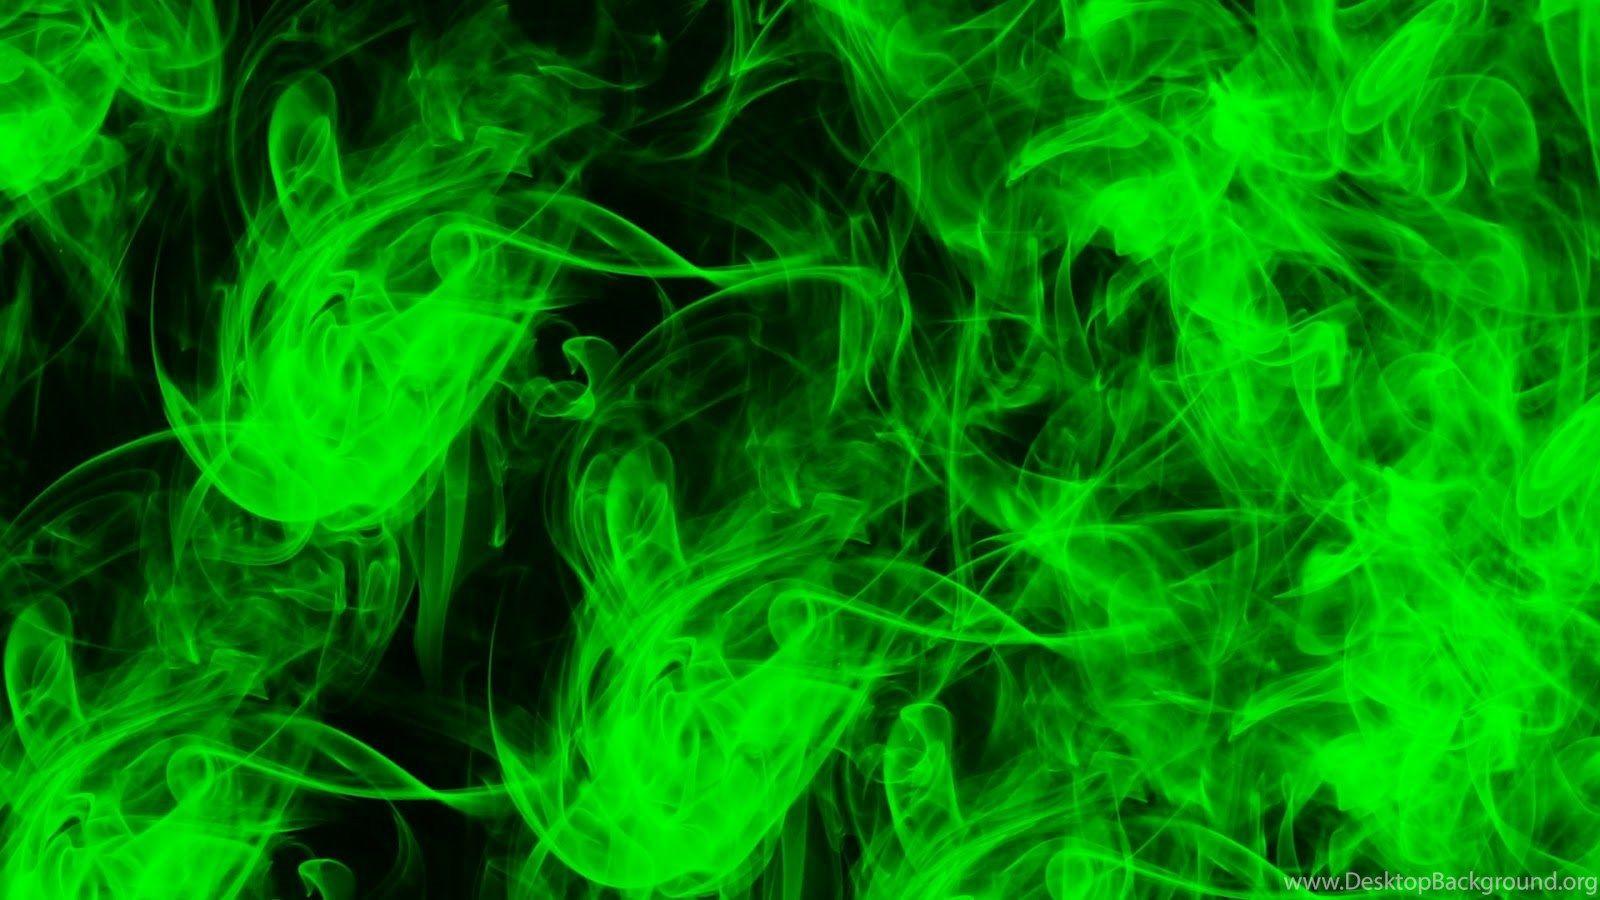 Green Fire Wallpaper Group , Download for free